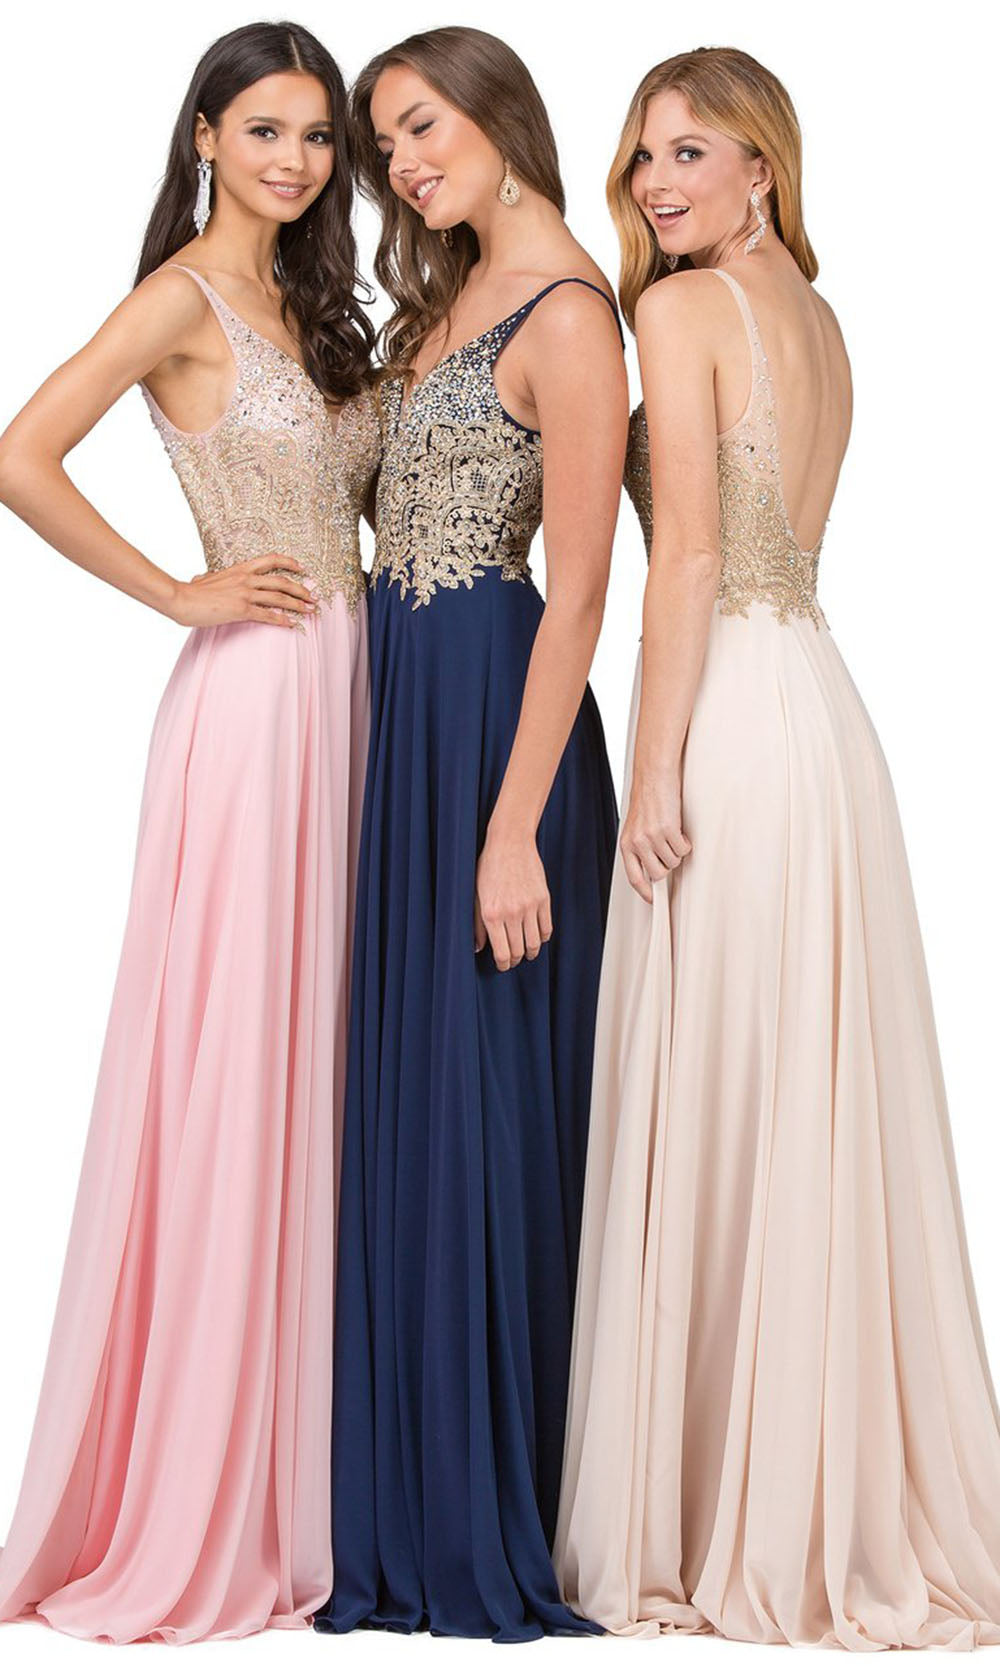 Dancing Queen - 2259 Embellished Deep V Neck A-Line Gown In Pink and Blue